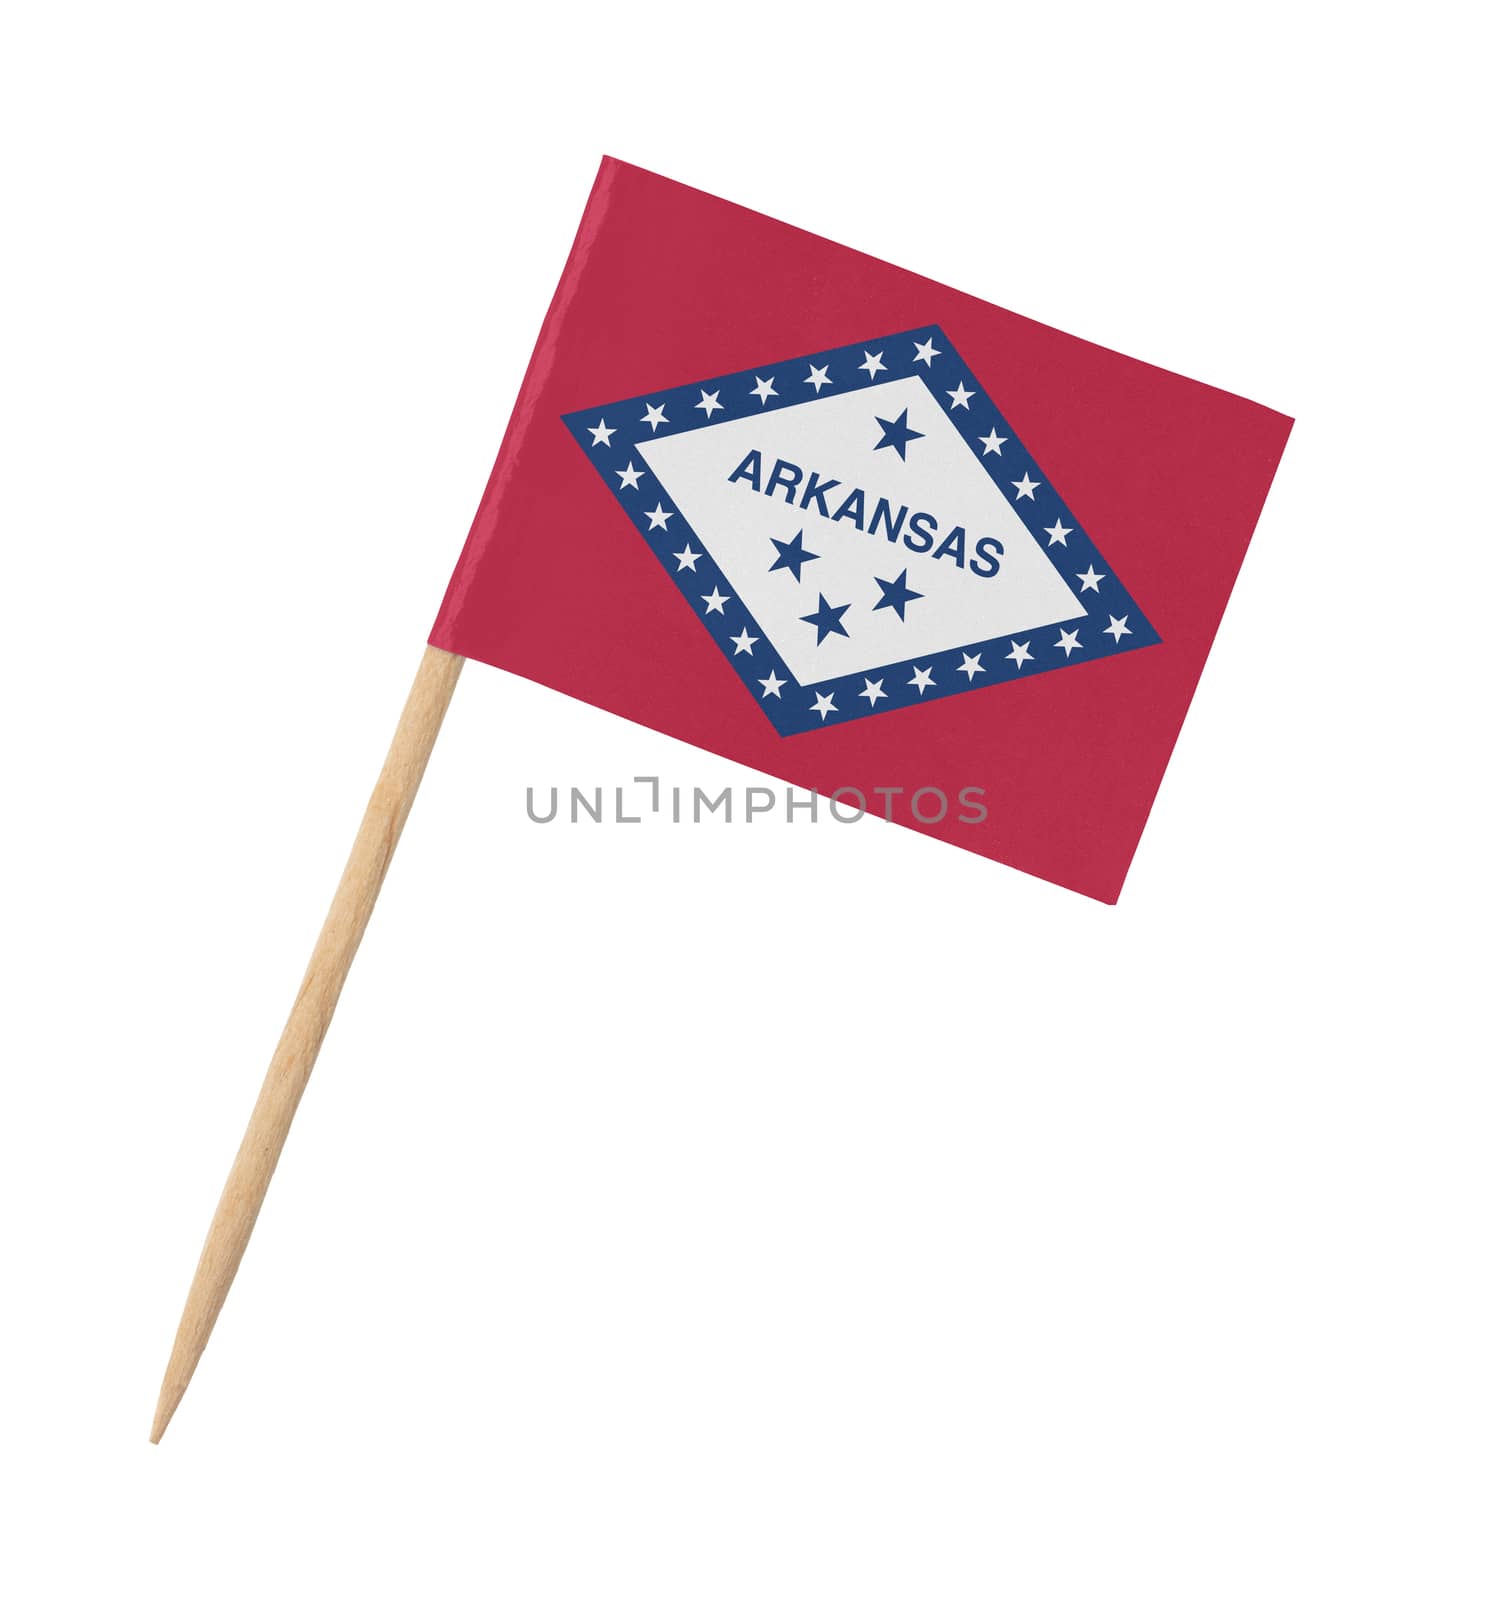 Small paper US-state flag on wooden stick - Arkansas - Isolated on white